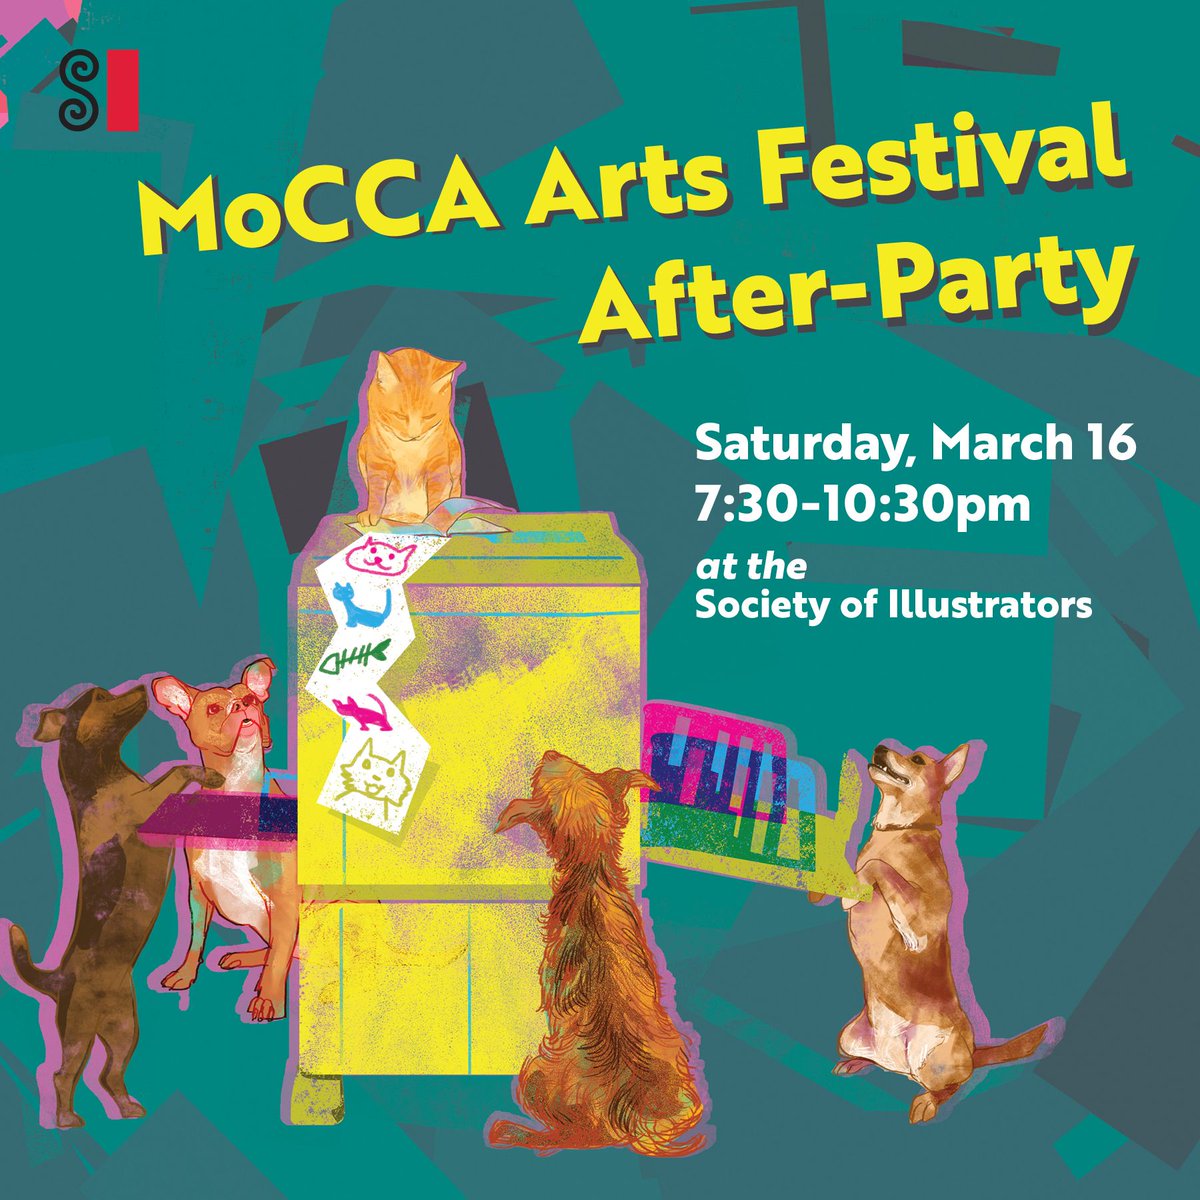 The After-Party is back! All are welcome to visit the Society of Illustrators’ Museum on Saturday, March 16th, following the SI MoCCA Arts Festival for a celebration of comics! Tickets are $15. Click here: bit.ly/3V68M2C